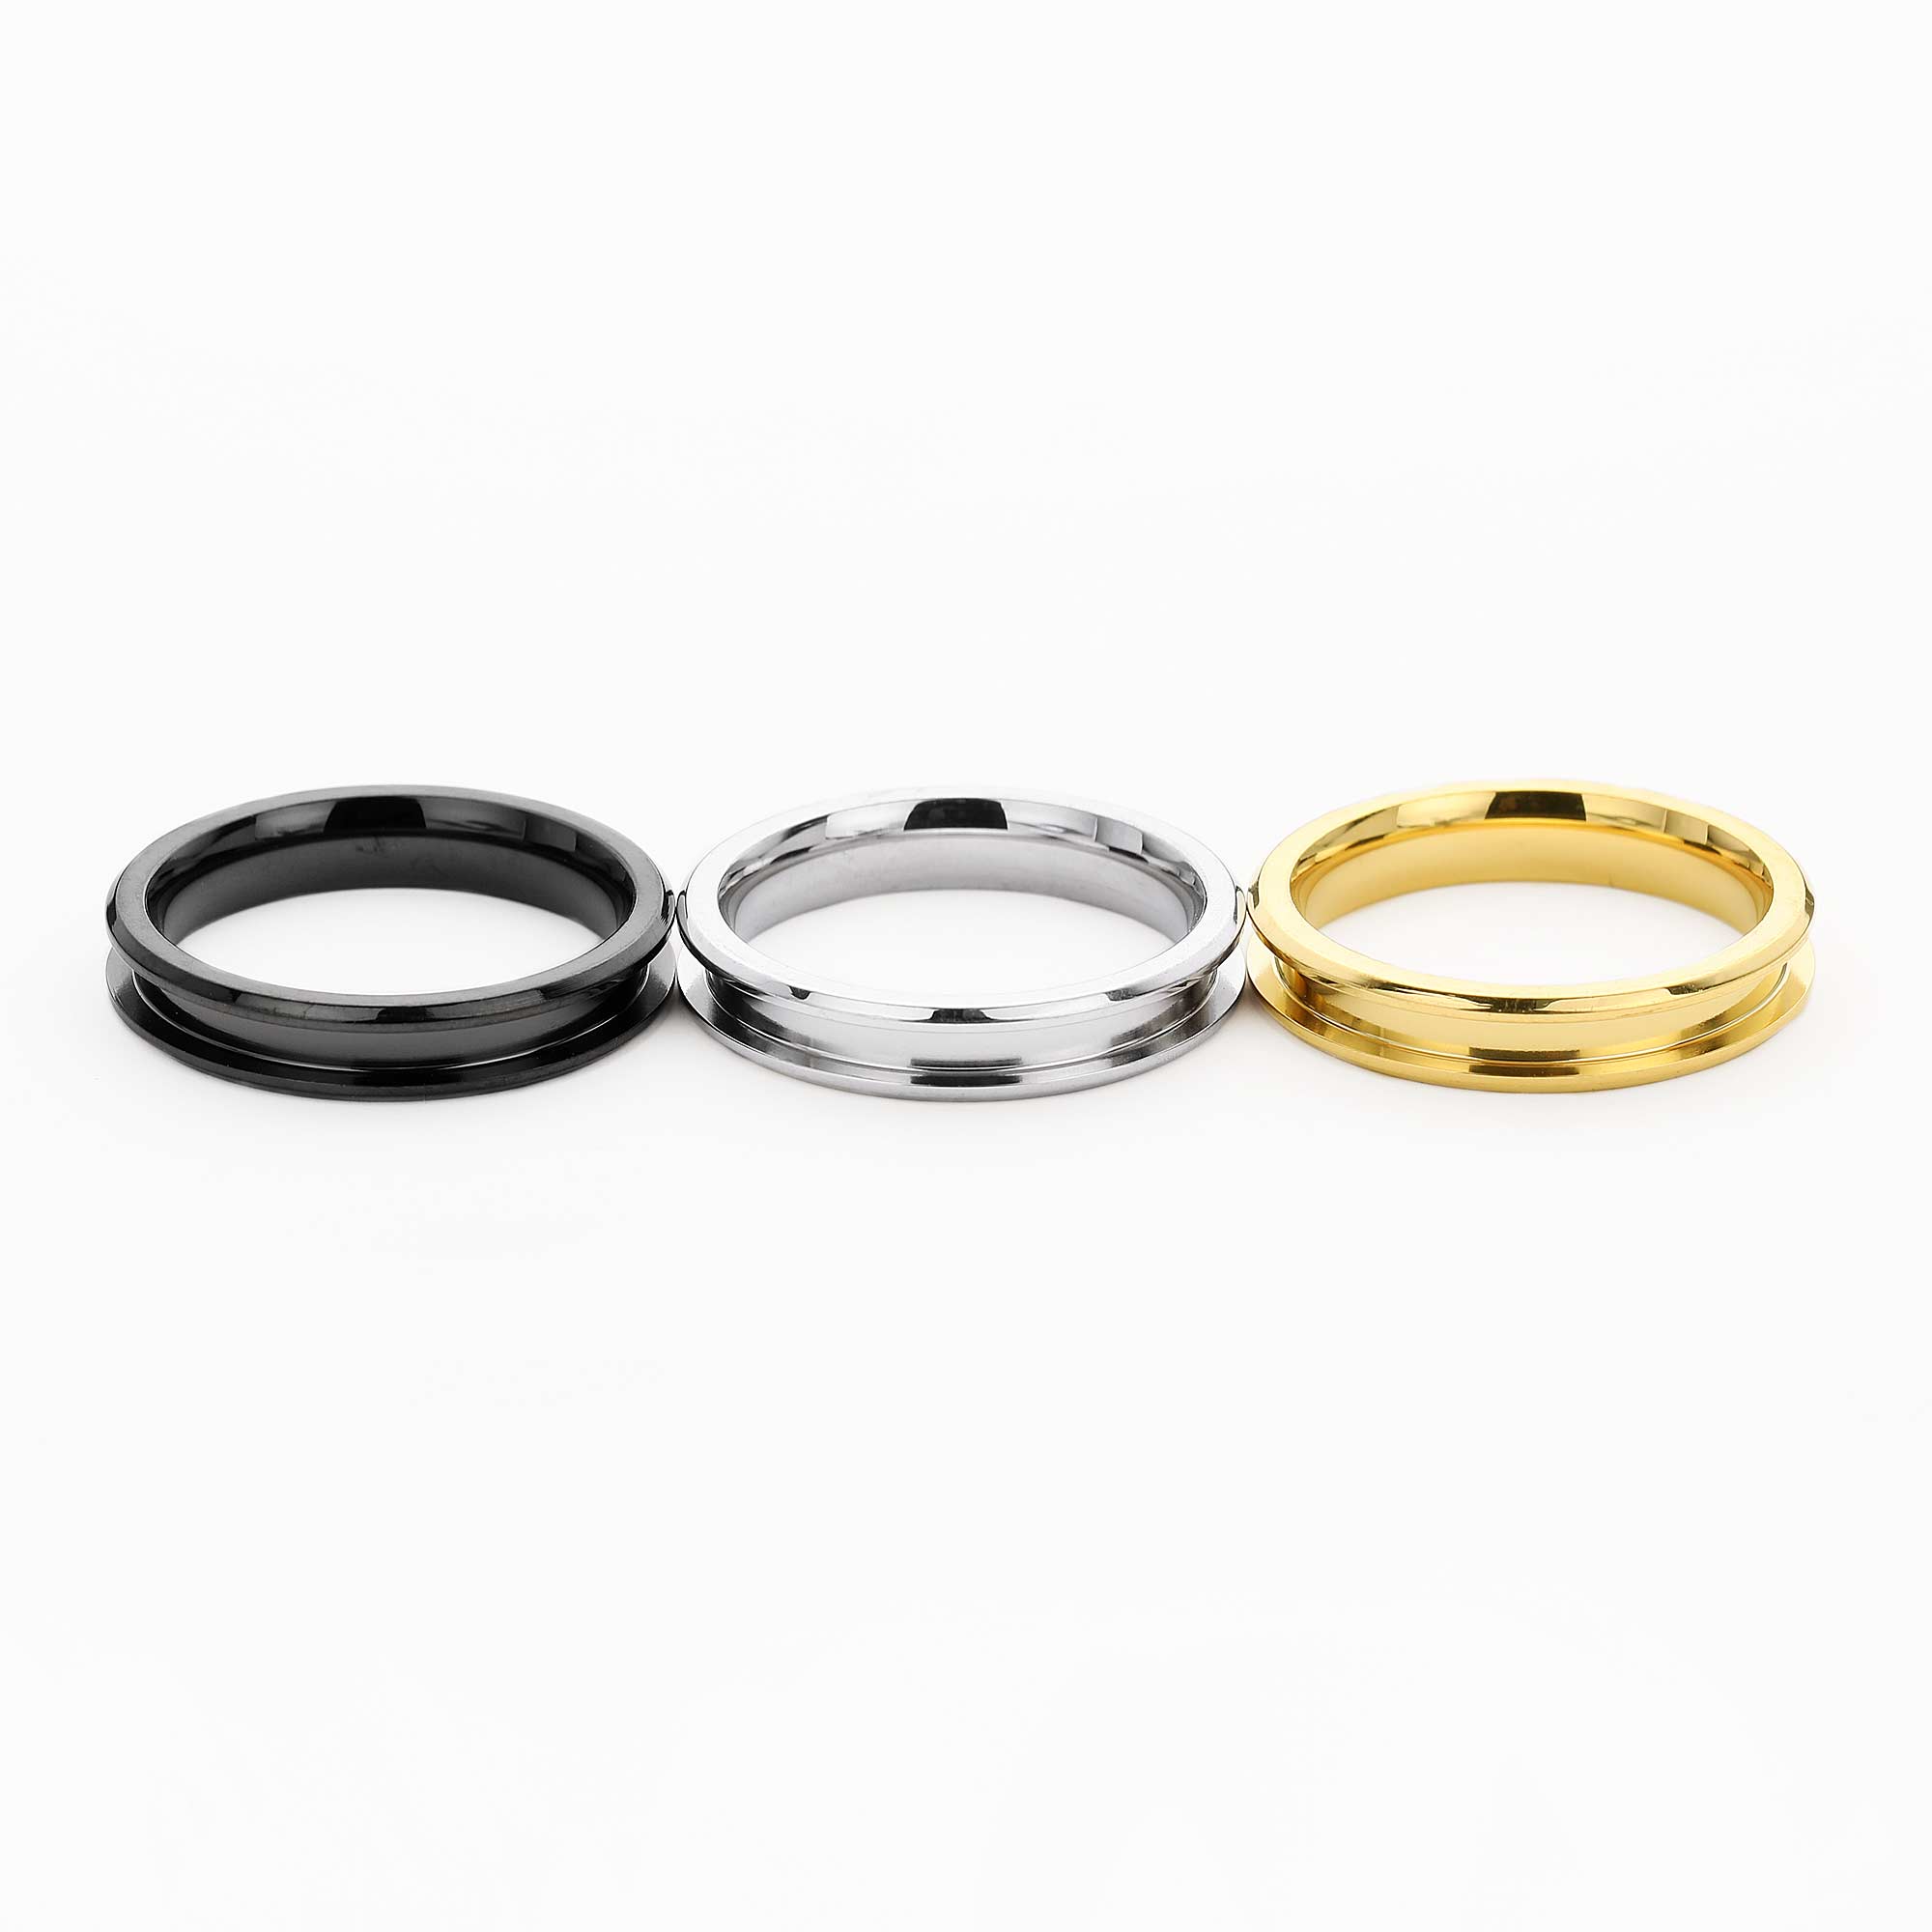 2MM Keepsake Breast Milk Resin Ashes Channel Ring Settings,Channel Bezel Stainless Steel Ring Settings,Silver Gold Black Stainless Steel Ring,DIY Jewelry Supplies 1294593 - Click Image to Close